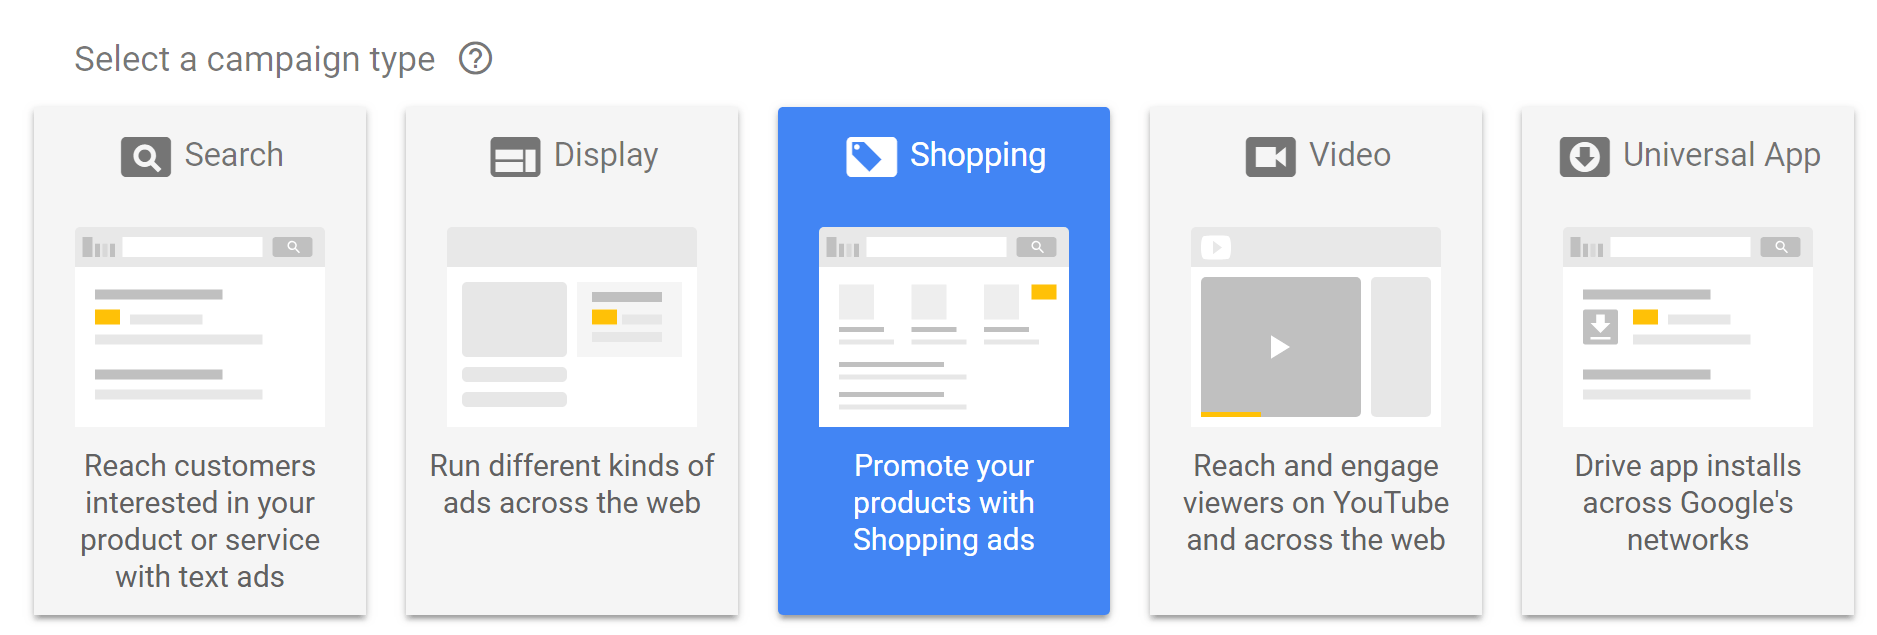 Google Shopping Campaign 